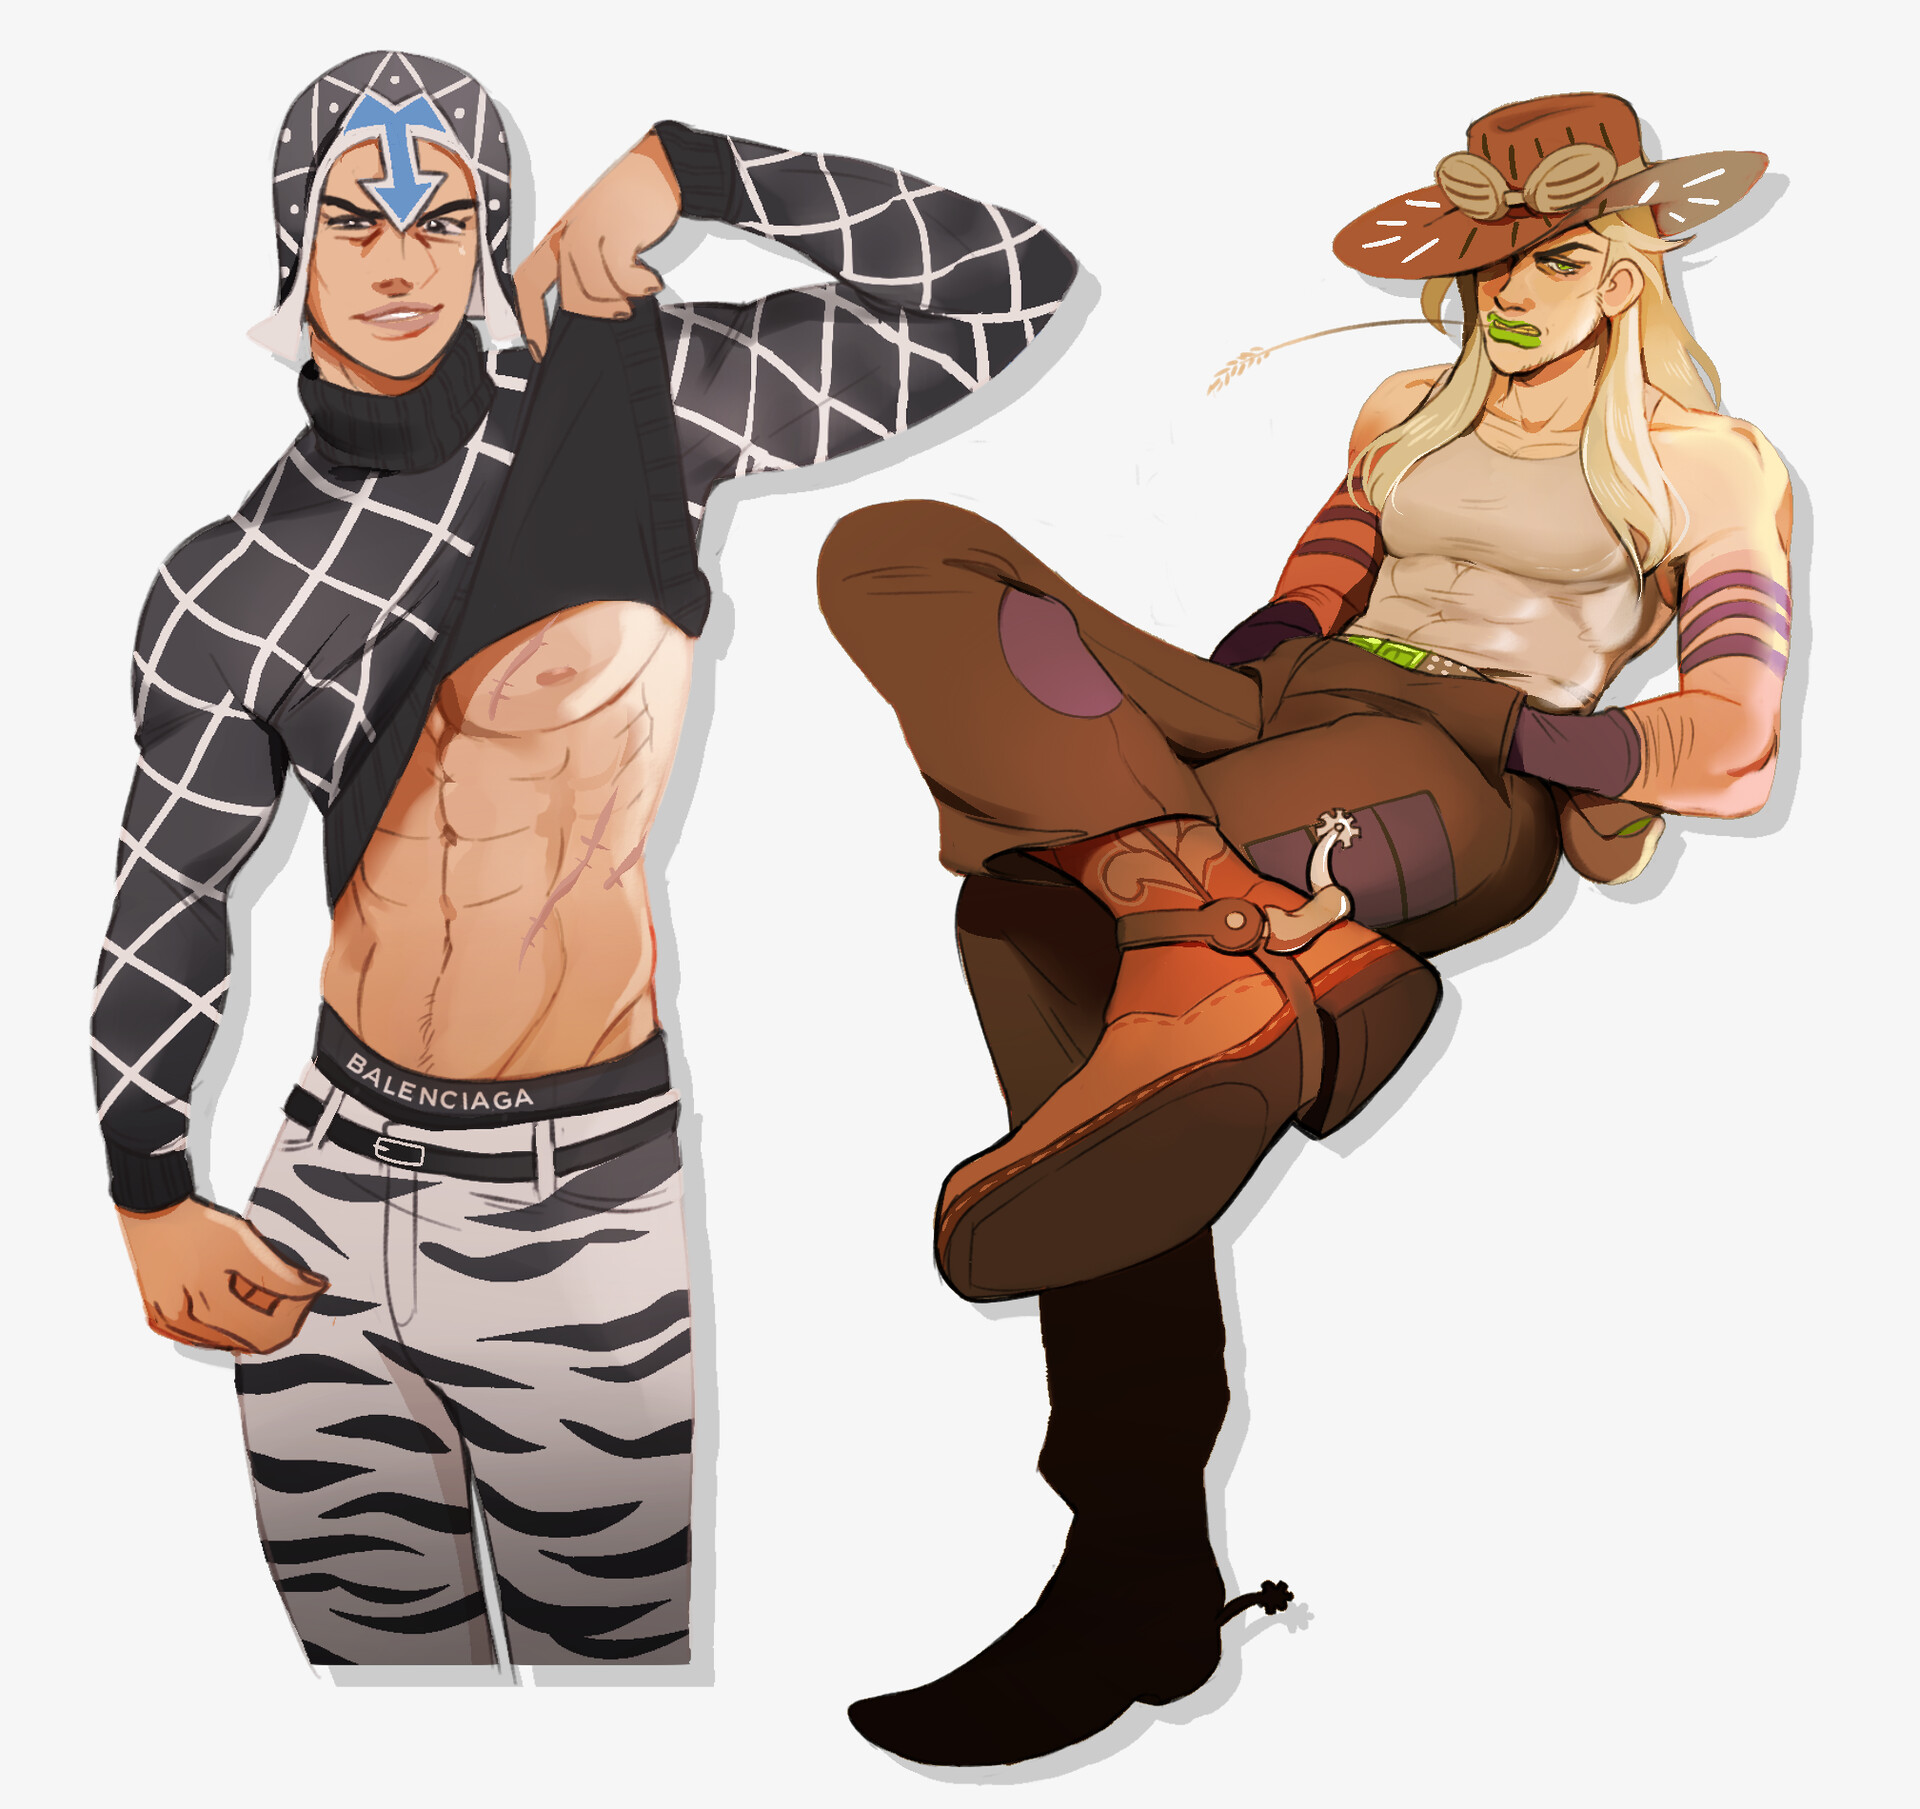 mista and gyro from jojo's bizarre adventure. you can tell this series...